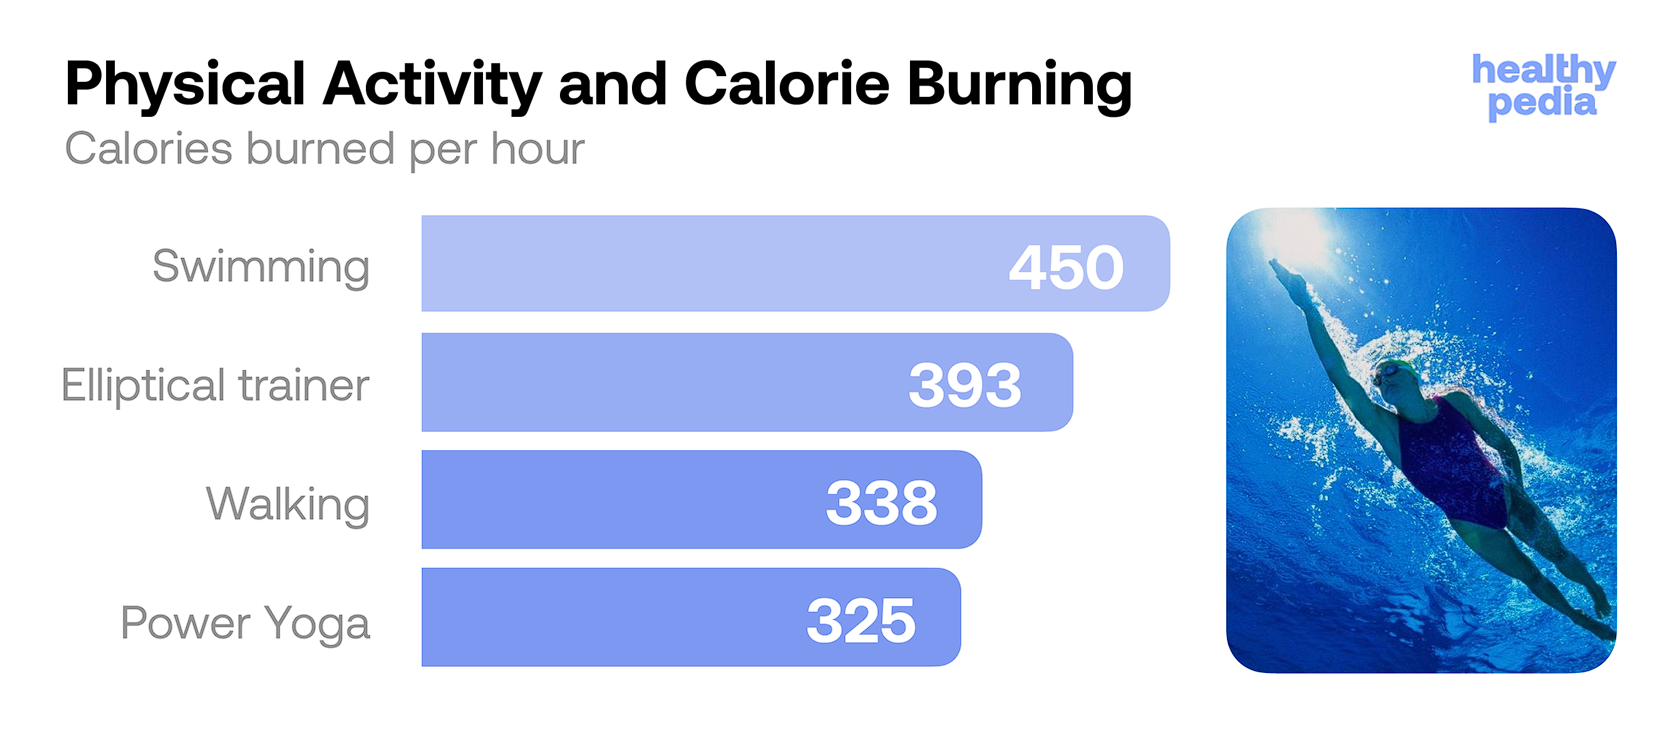 Physical Activity and Clorie Burning, stats